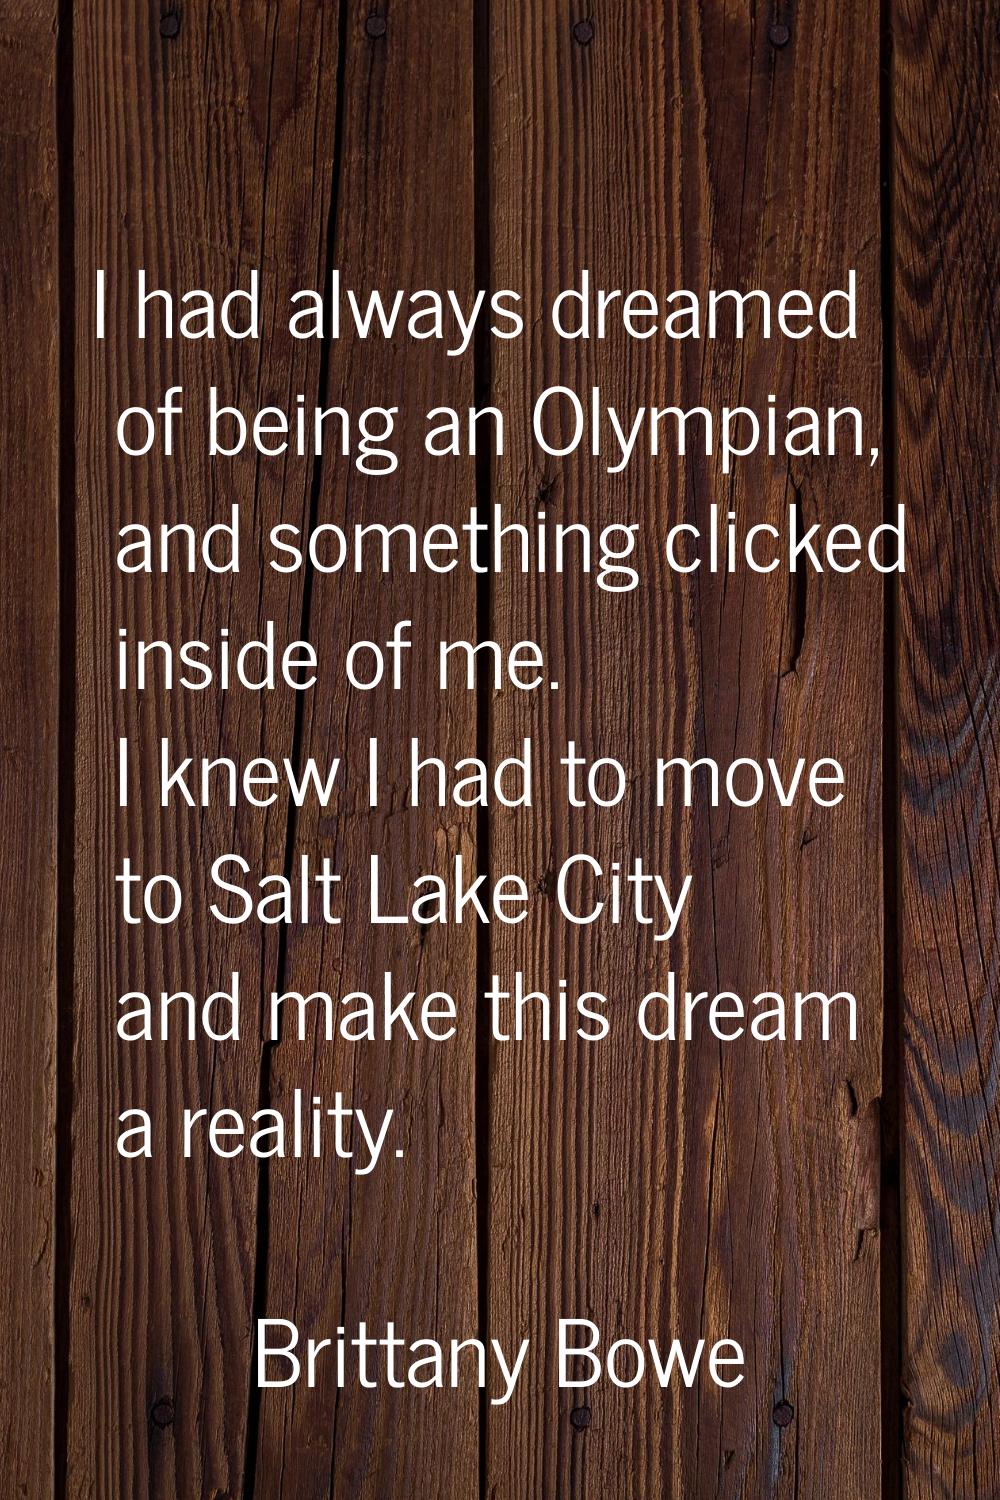 I had always dreamed of being an Olympian, and something clicked inside of me. I knew I had to move